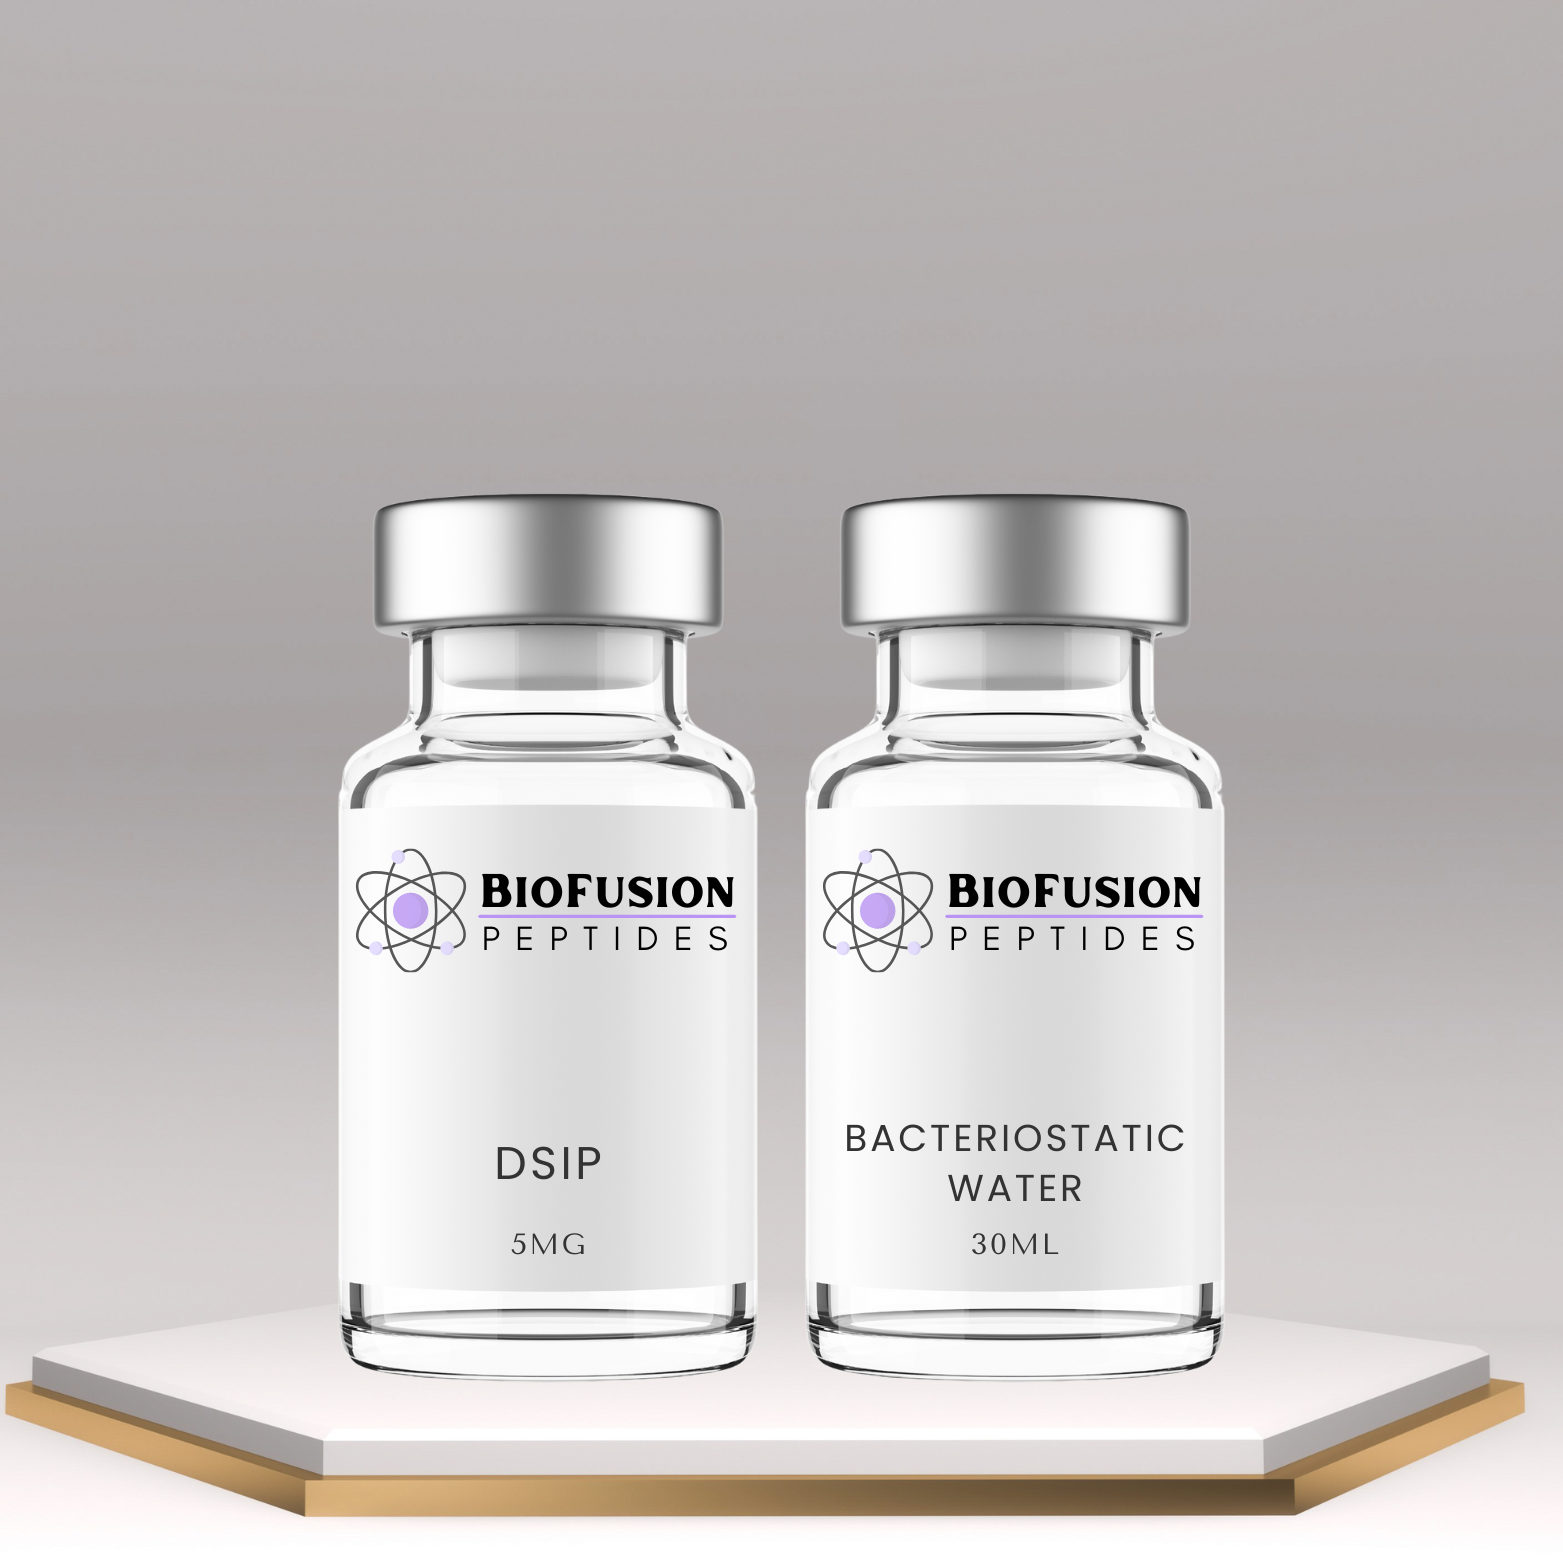 BioFusion Peptides DSIP kit with bacteriostatic water